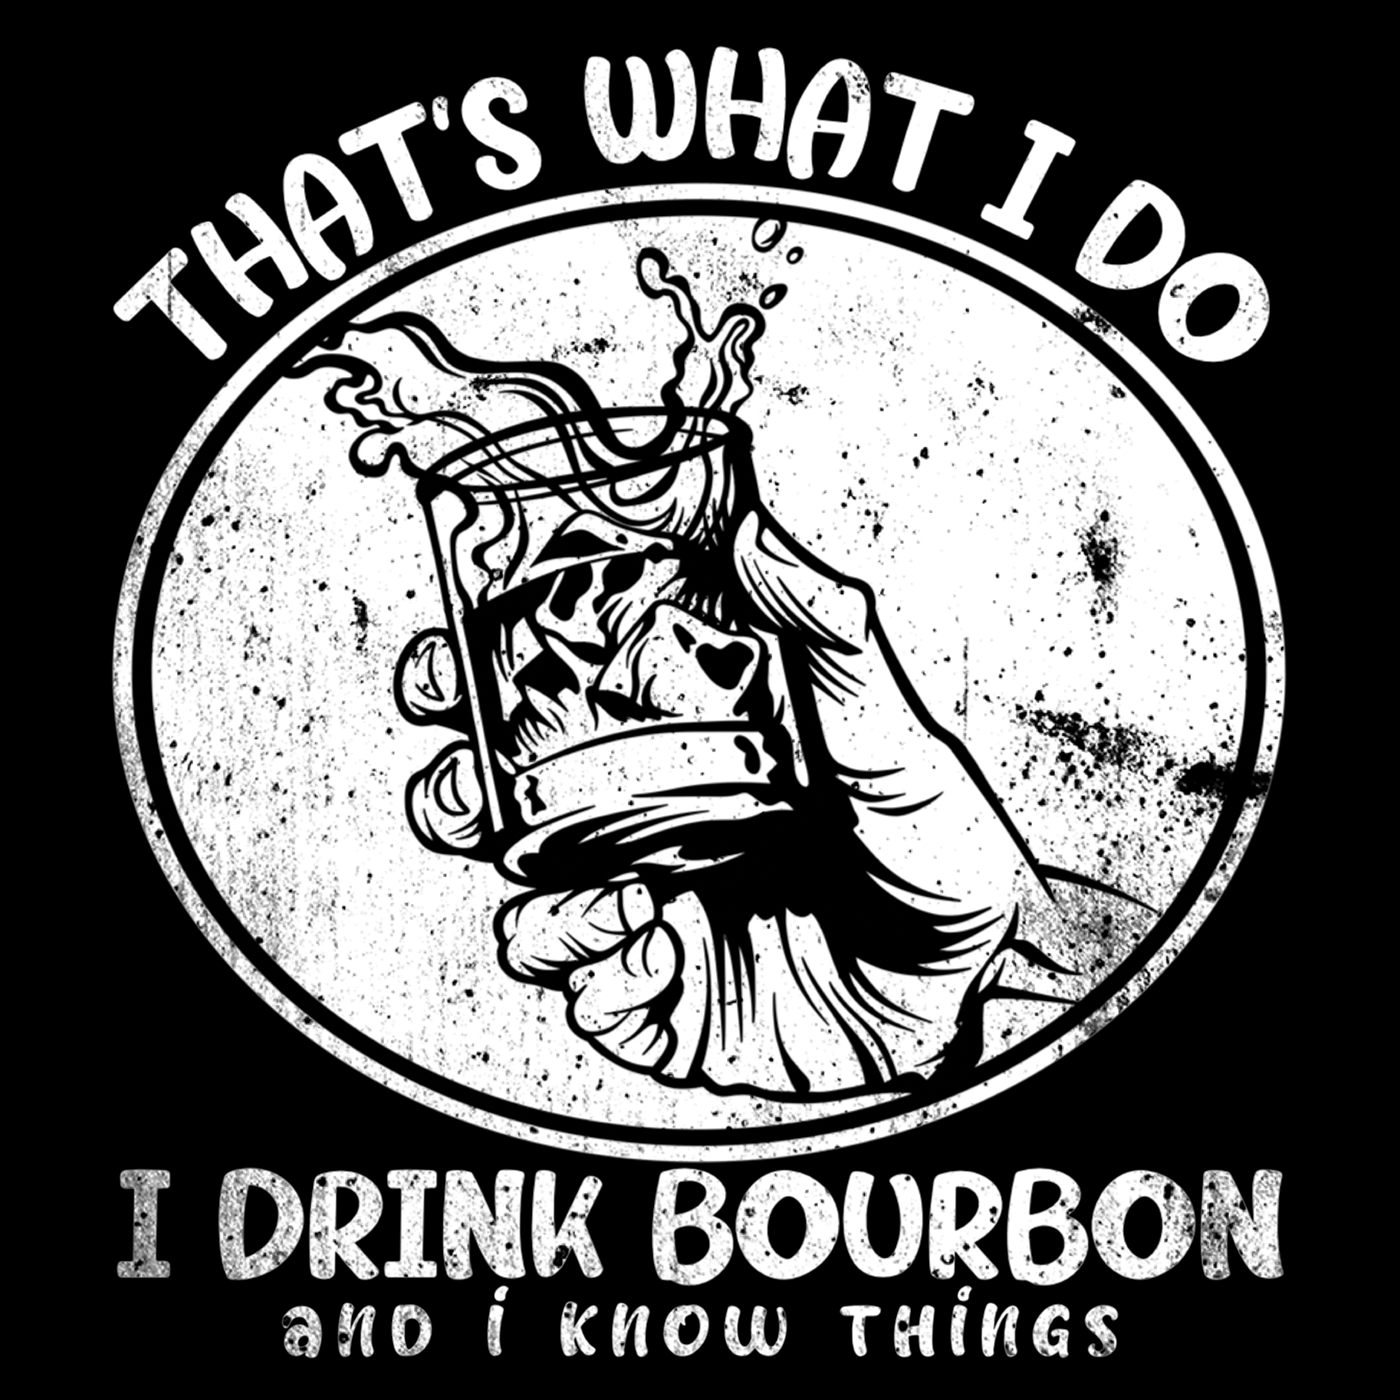 bear biscuit bourbon country Distressed drink flourish funny gravy Kentucky Parody Retro southern vintage Whiskey